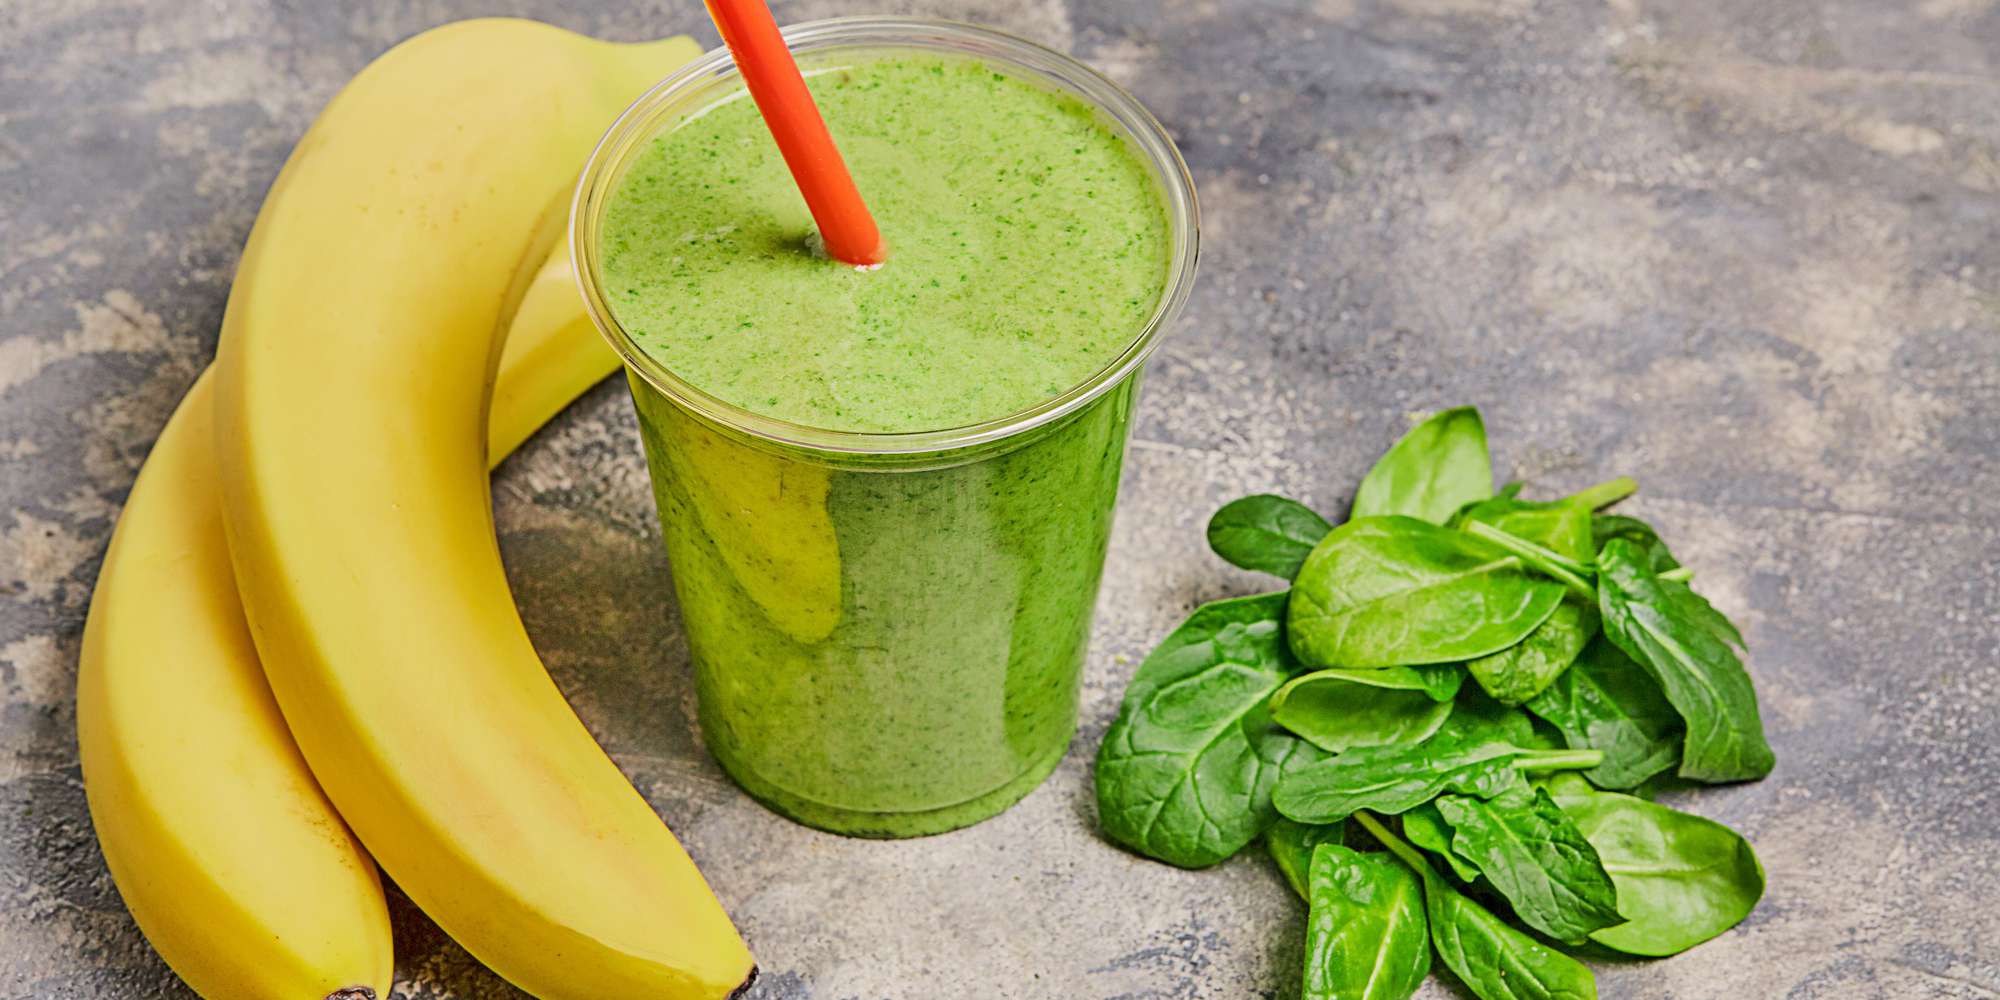 Banana, Kale and Coconut Water Smoothie